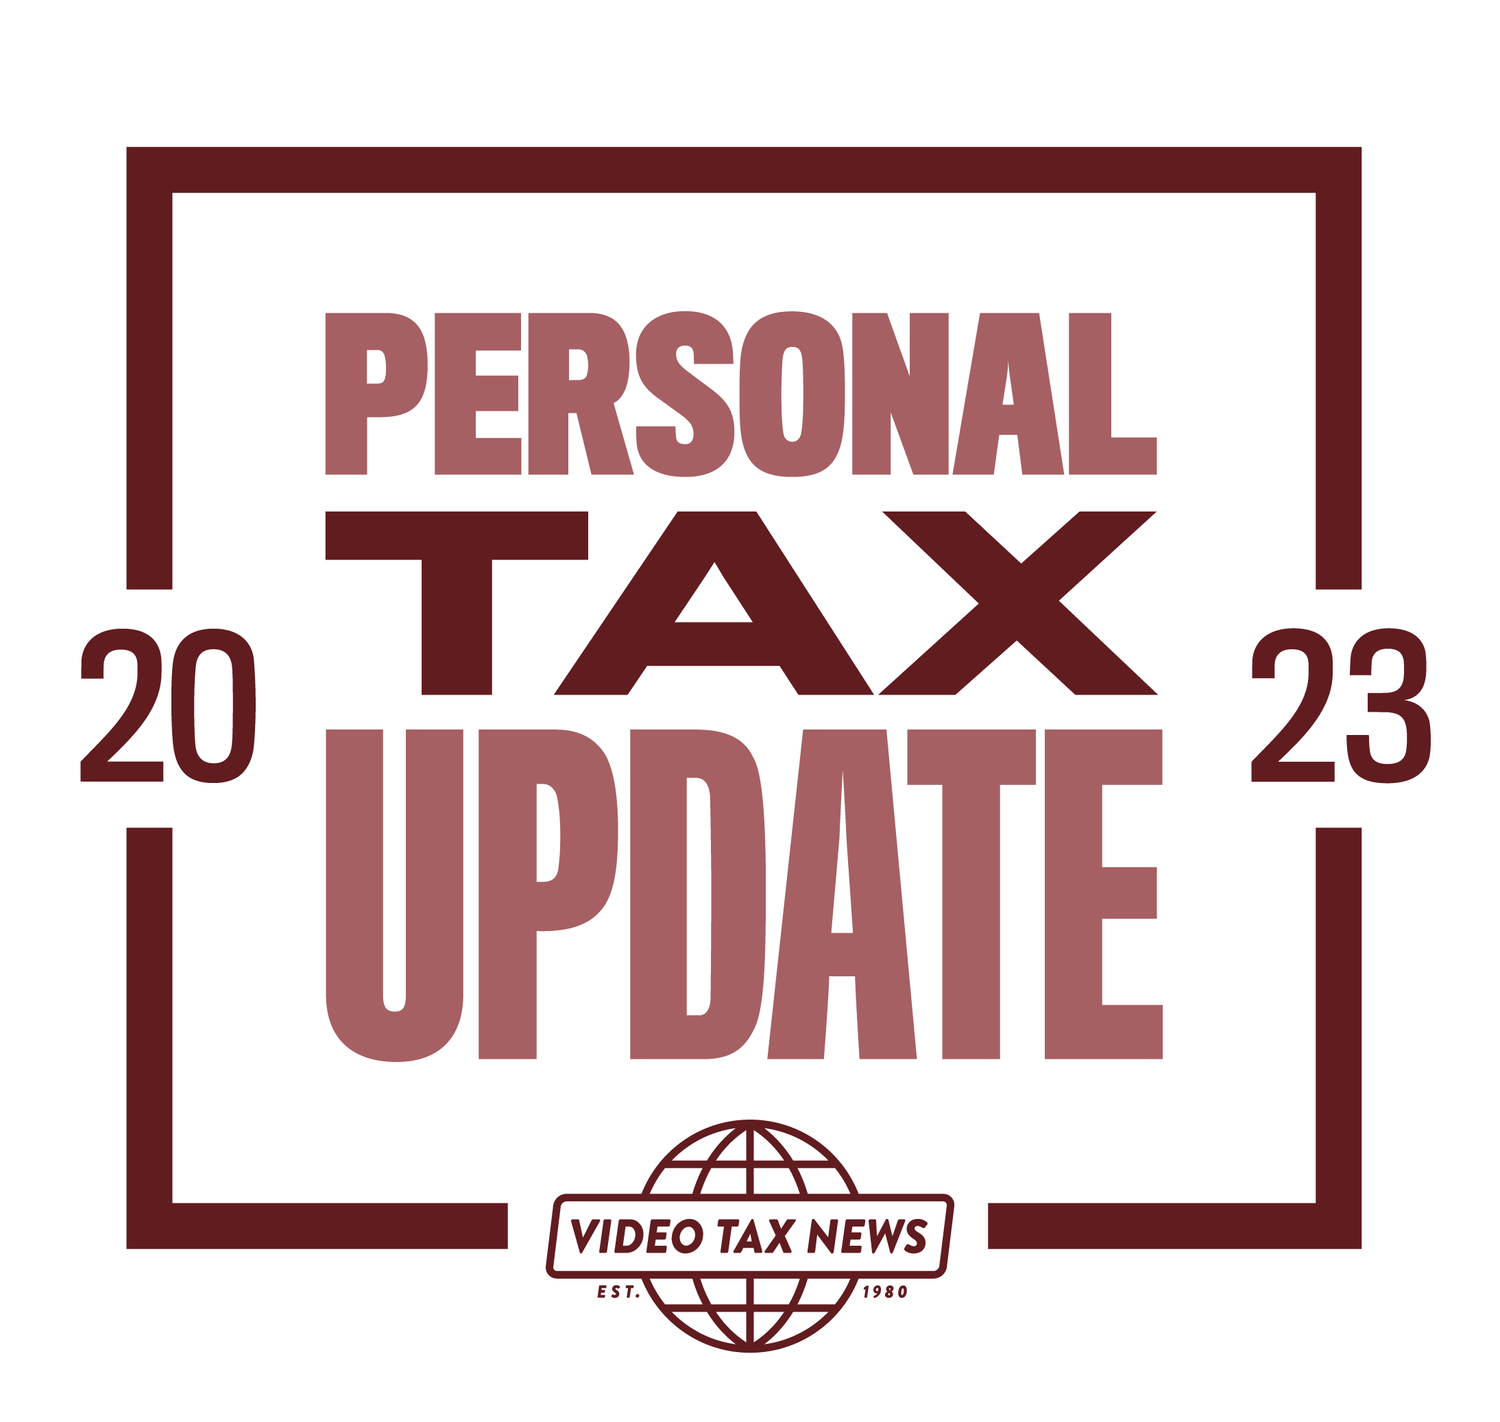 Registration open for Personal Tax Update 2023 Video Tax News